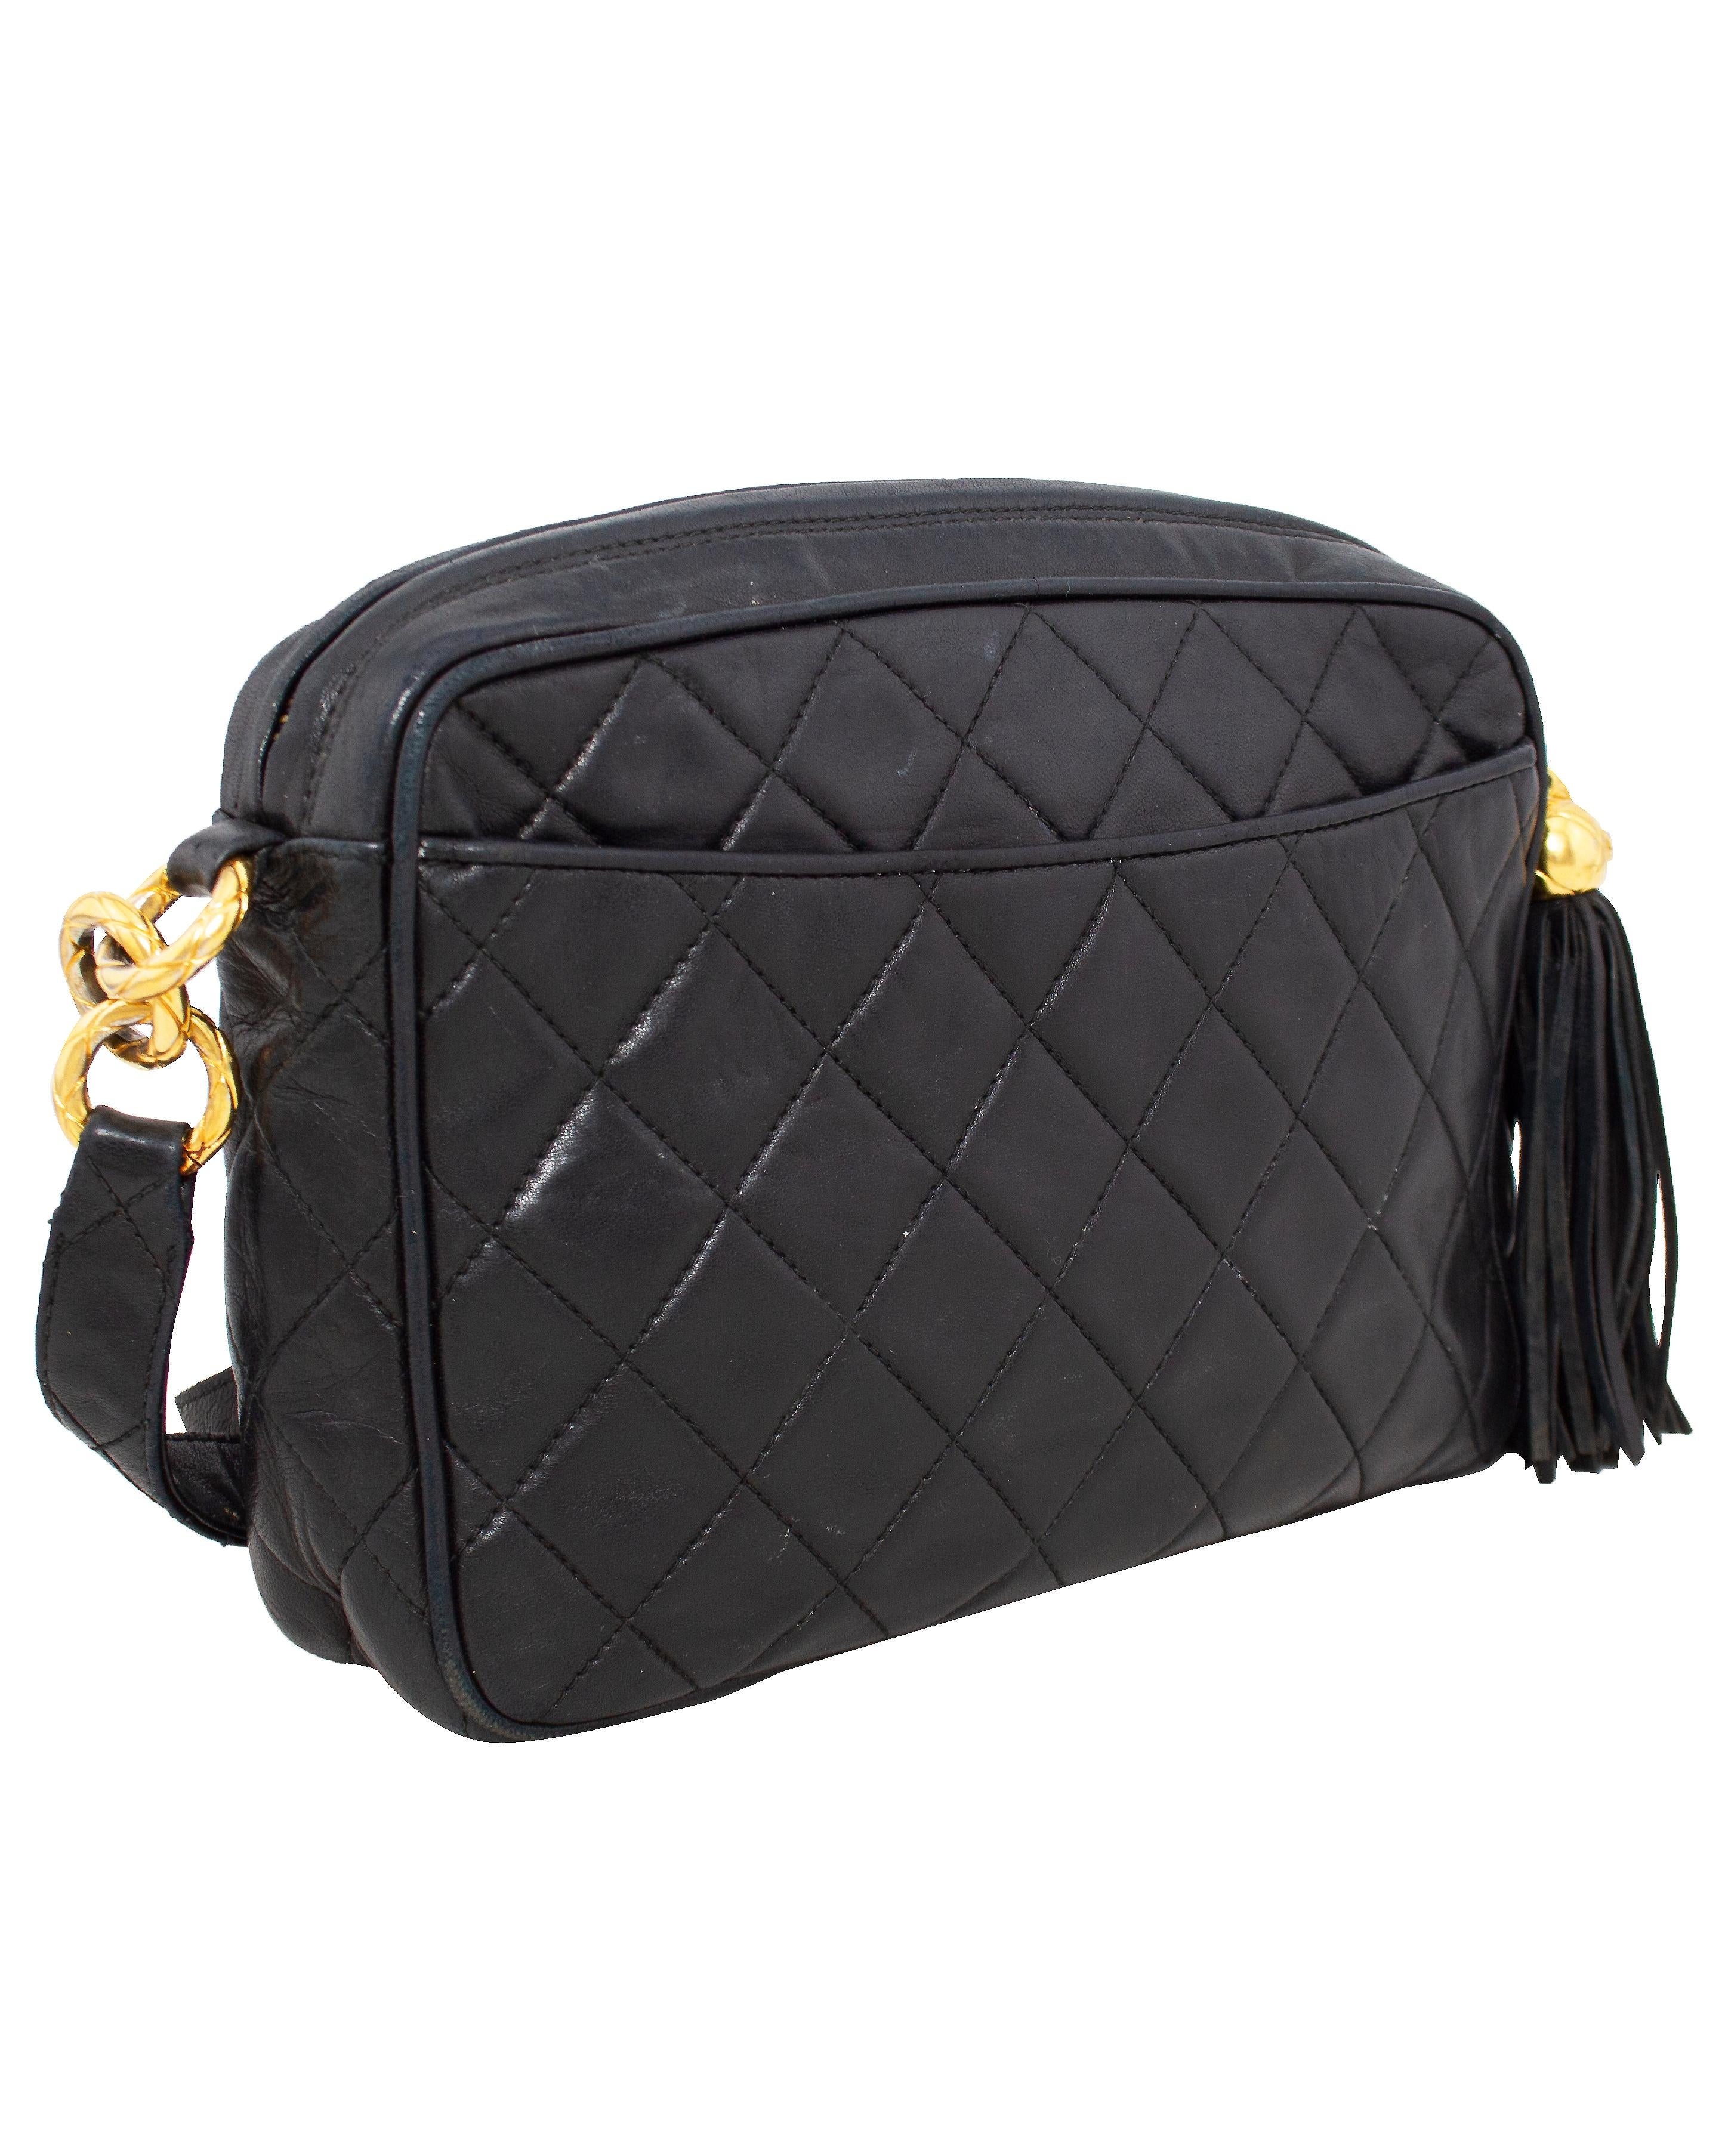 A classic and timeless Chanel bag from the 1980s. Black quilted leather with contrasting gold tone hardware and a quilted leather strap. This is such a great, functional, yet chic bag with open slit pockets on either side for easy access to things